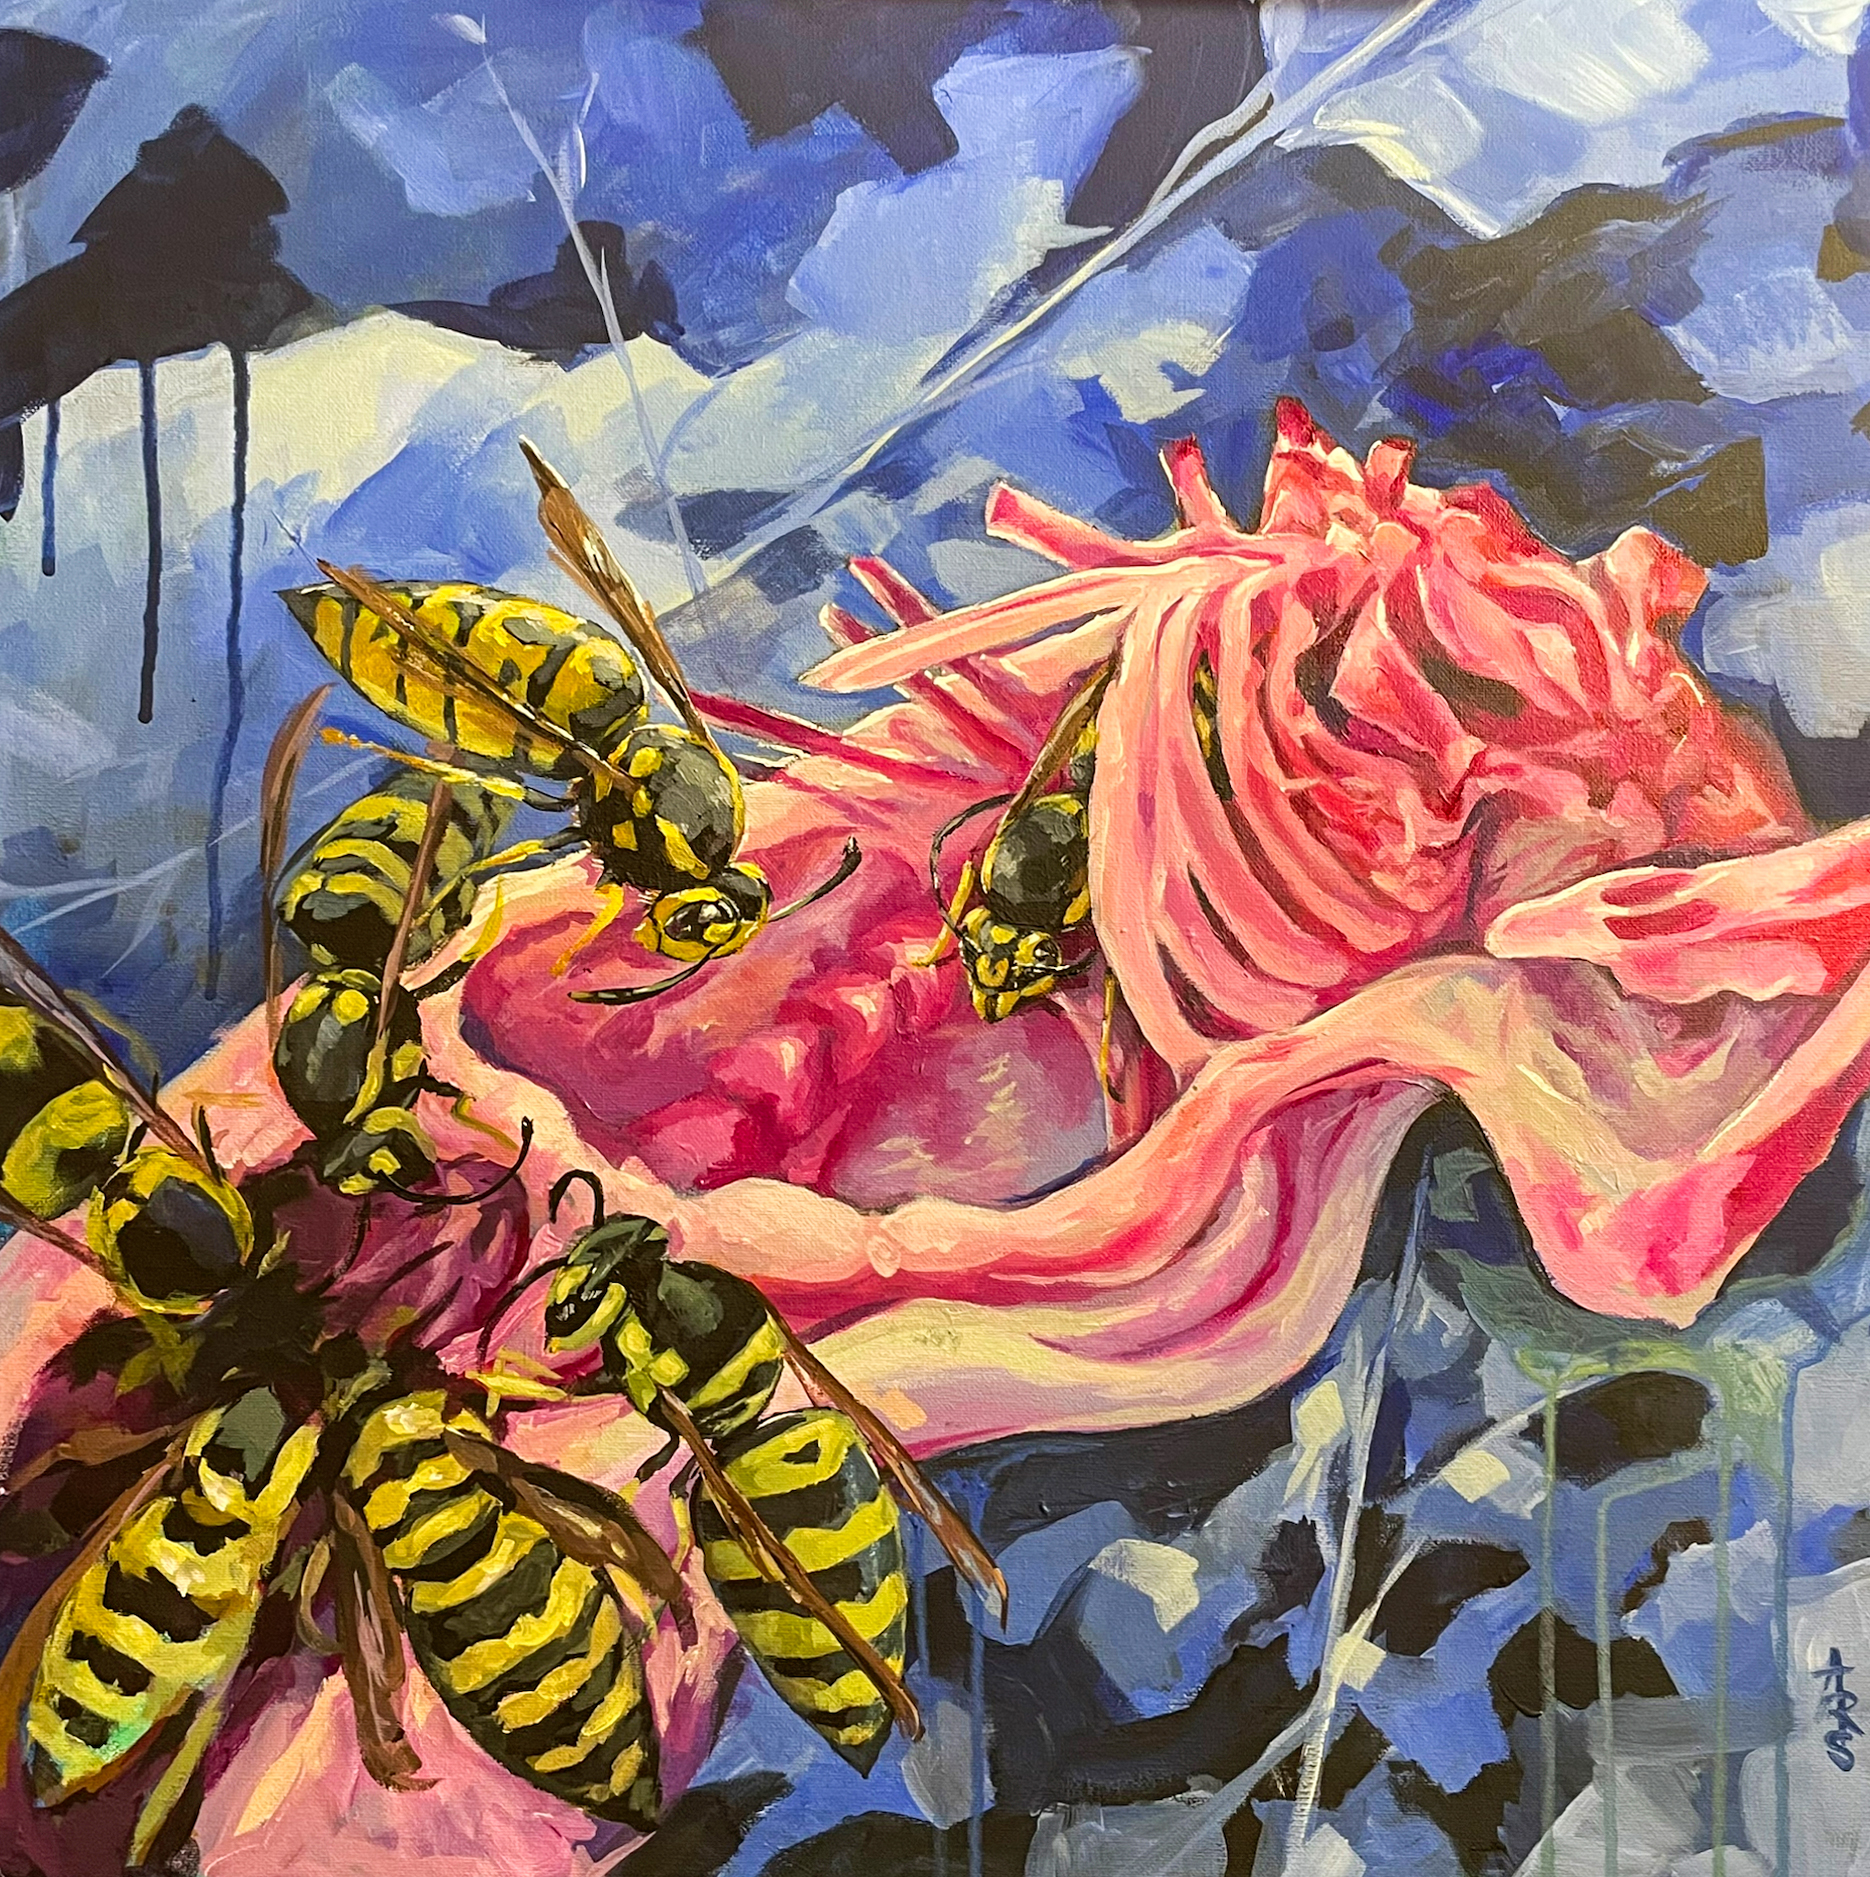 A painting of yellowjackets on carrion.